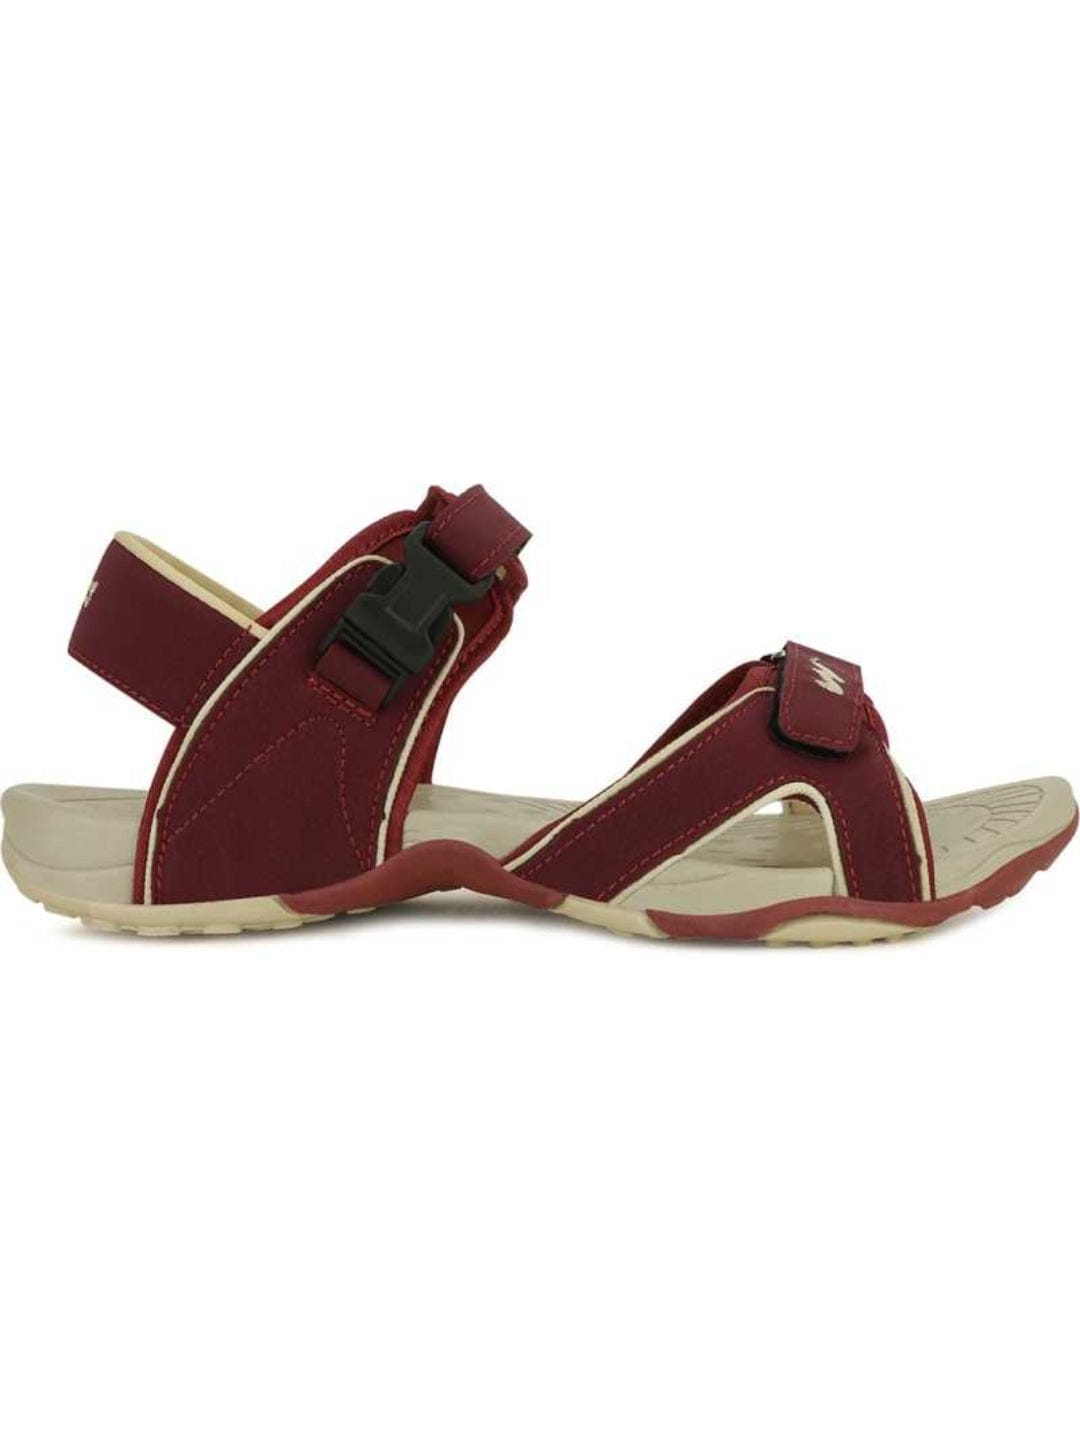 Red Flats Sandals Sports - Buy Red Flats Sandals Sports online in India